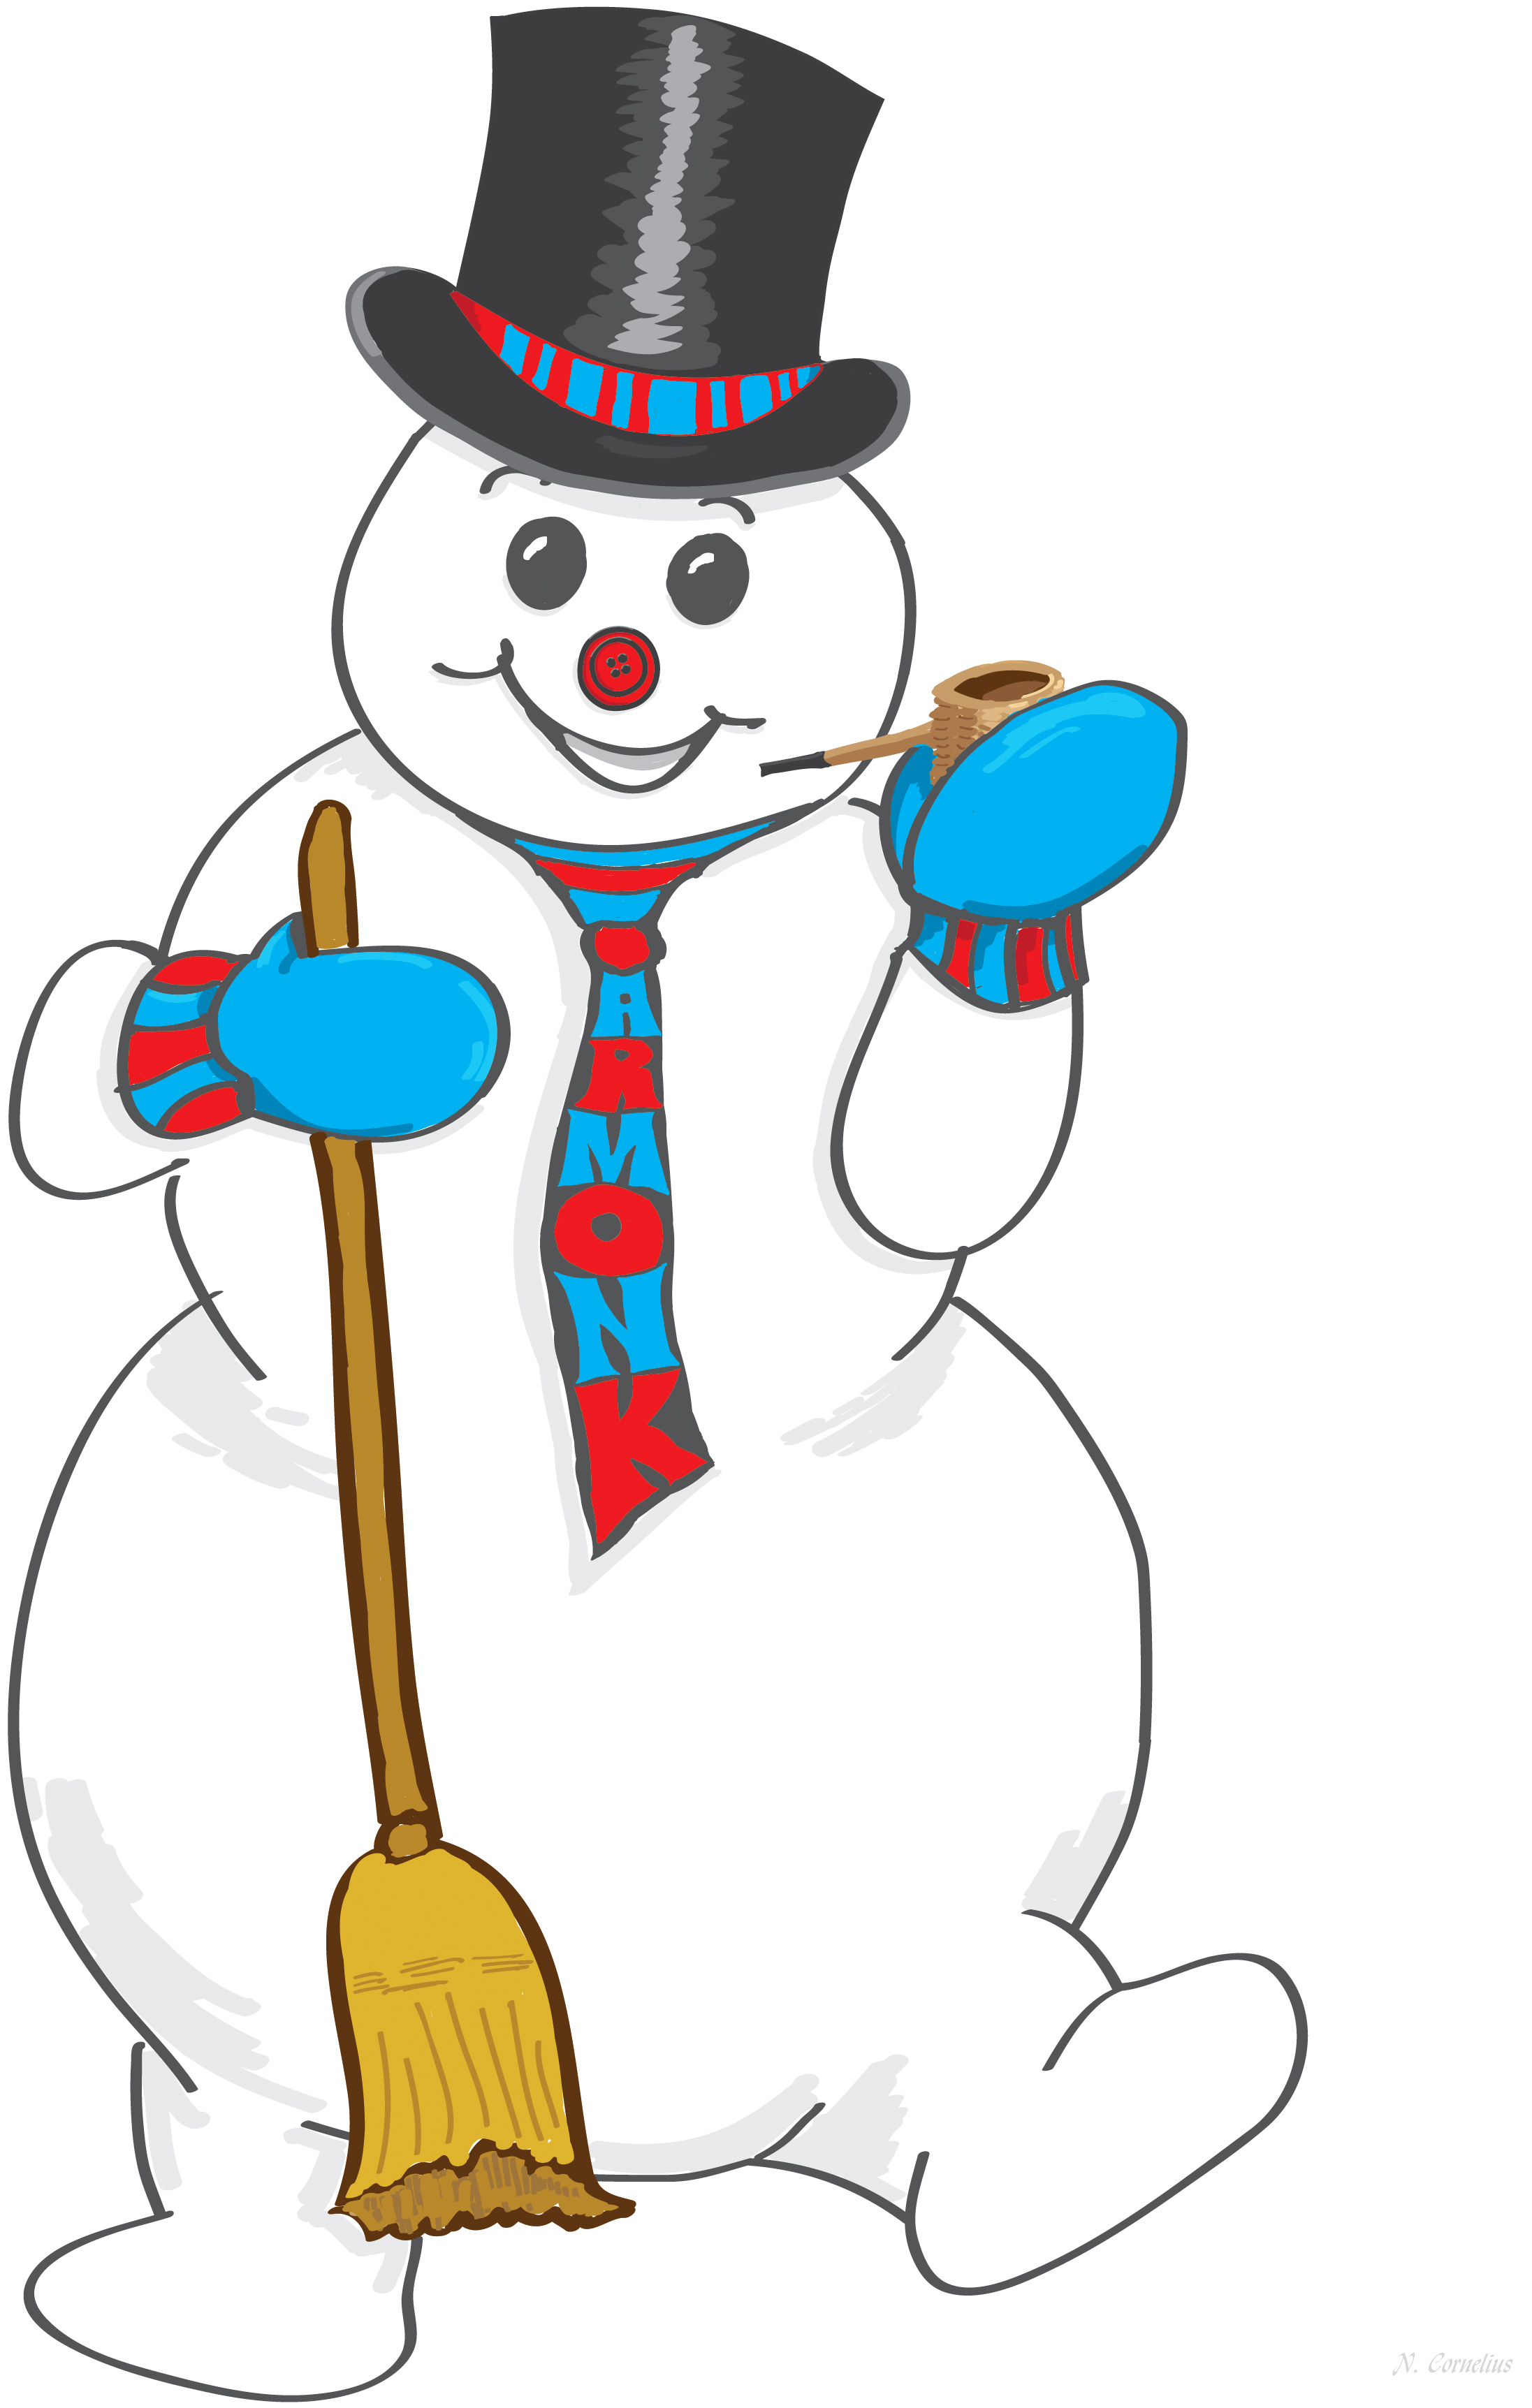 Clip Arts Related To : Frosty The Snowman Png. view all Frosty The ...